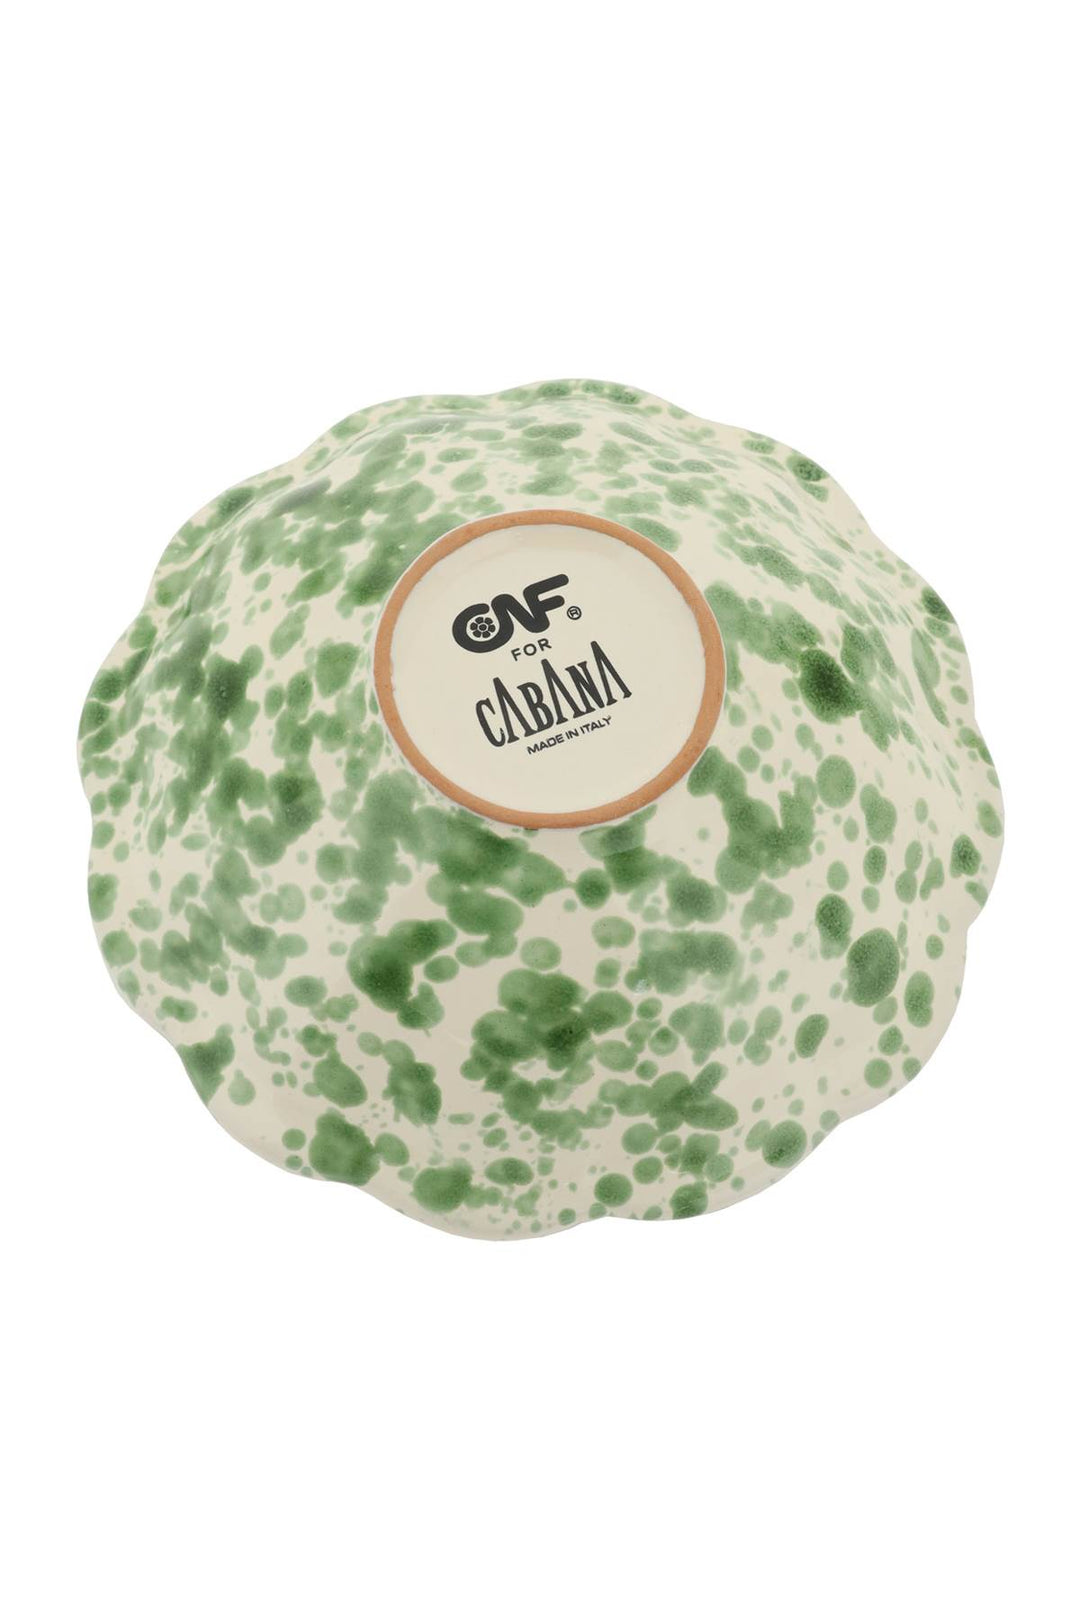 Cabana speckled small bowl-1